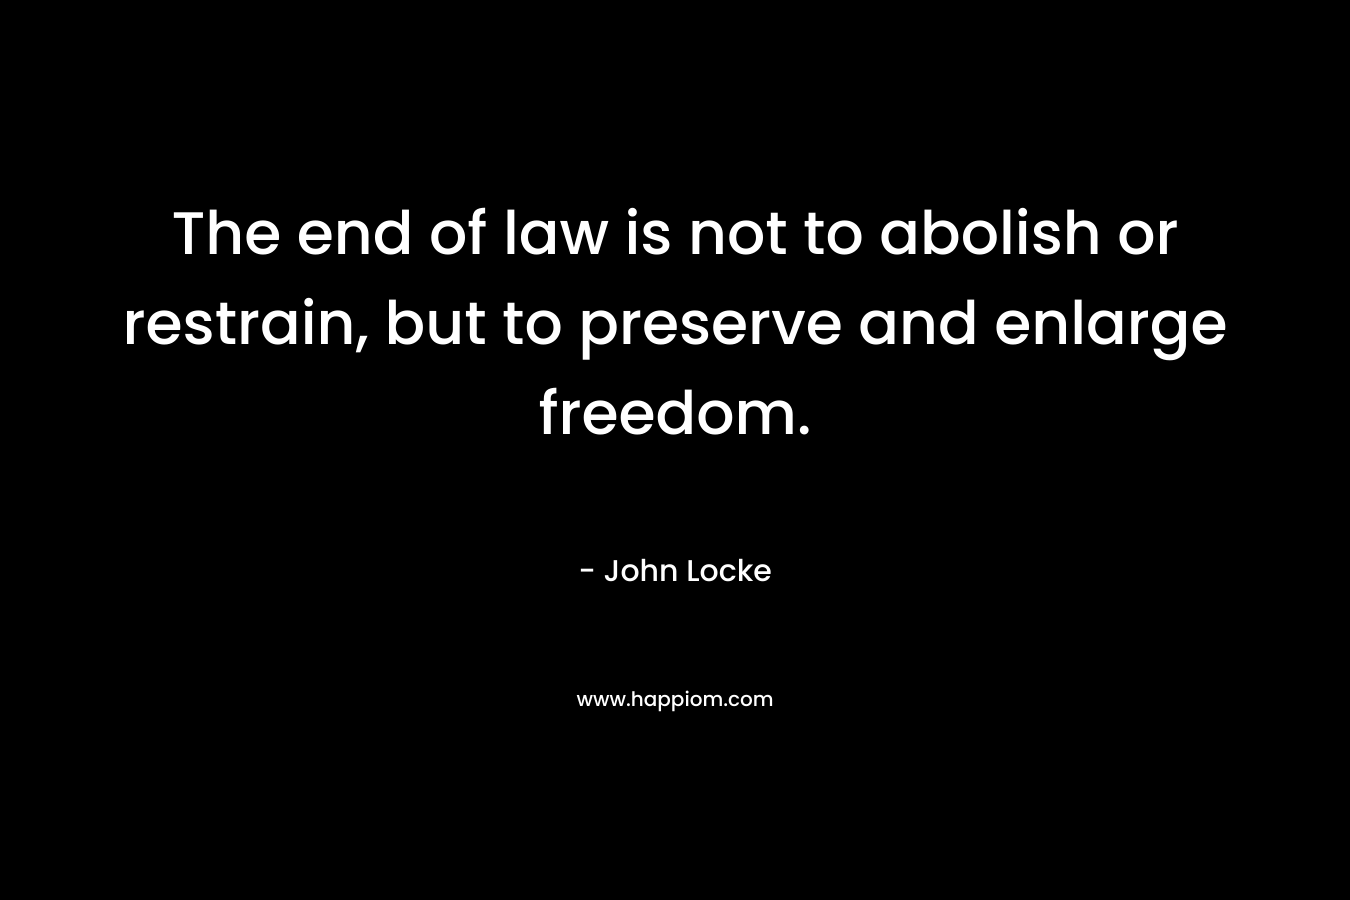 The end of law is not to abolish or restrain, but to preserve and enlarge freedom. – John Locke